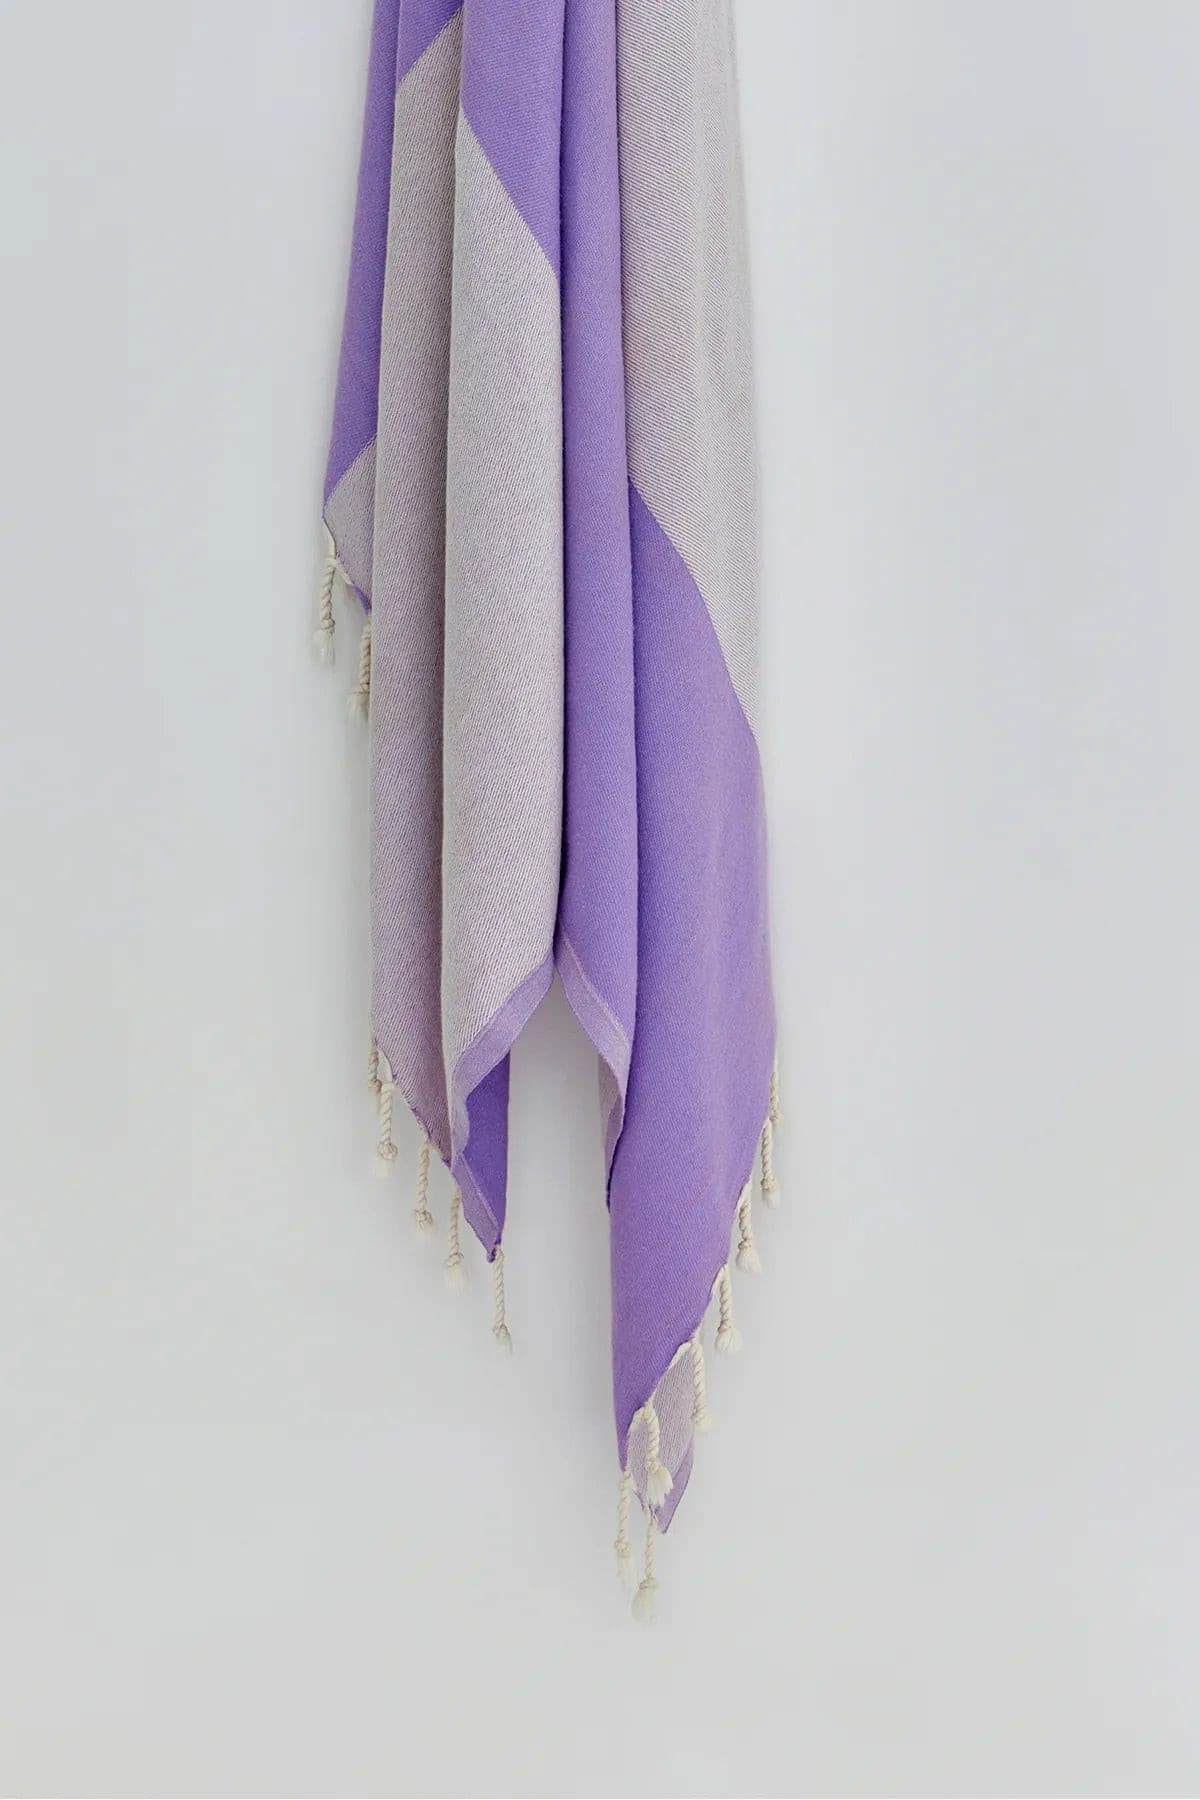 Beach/Bath,Lilac,Turkish towel,detailed,summer,line patterned,double-faces,purified sand,light,compact, easy pack,fun, recycled